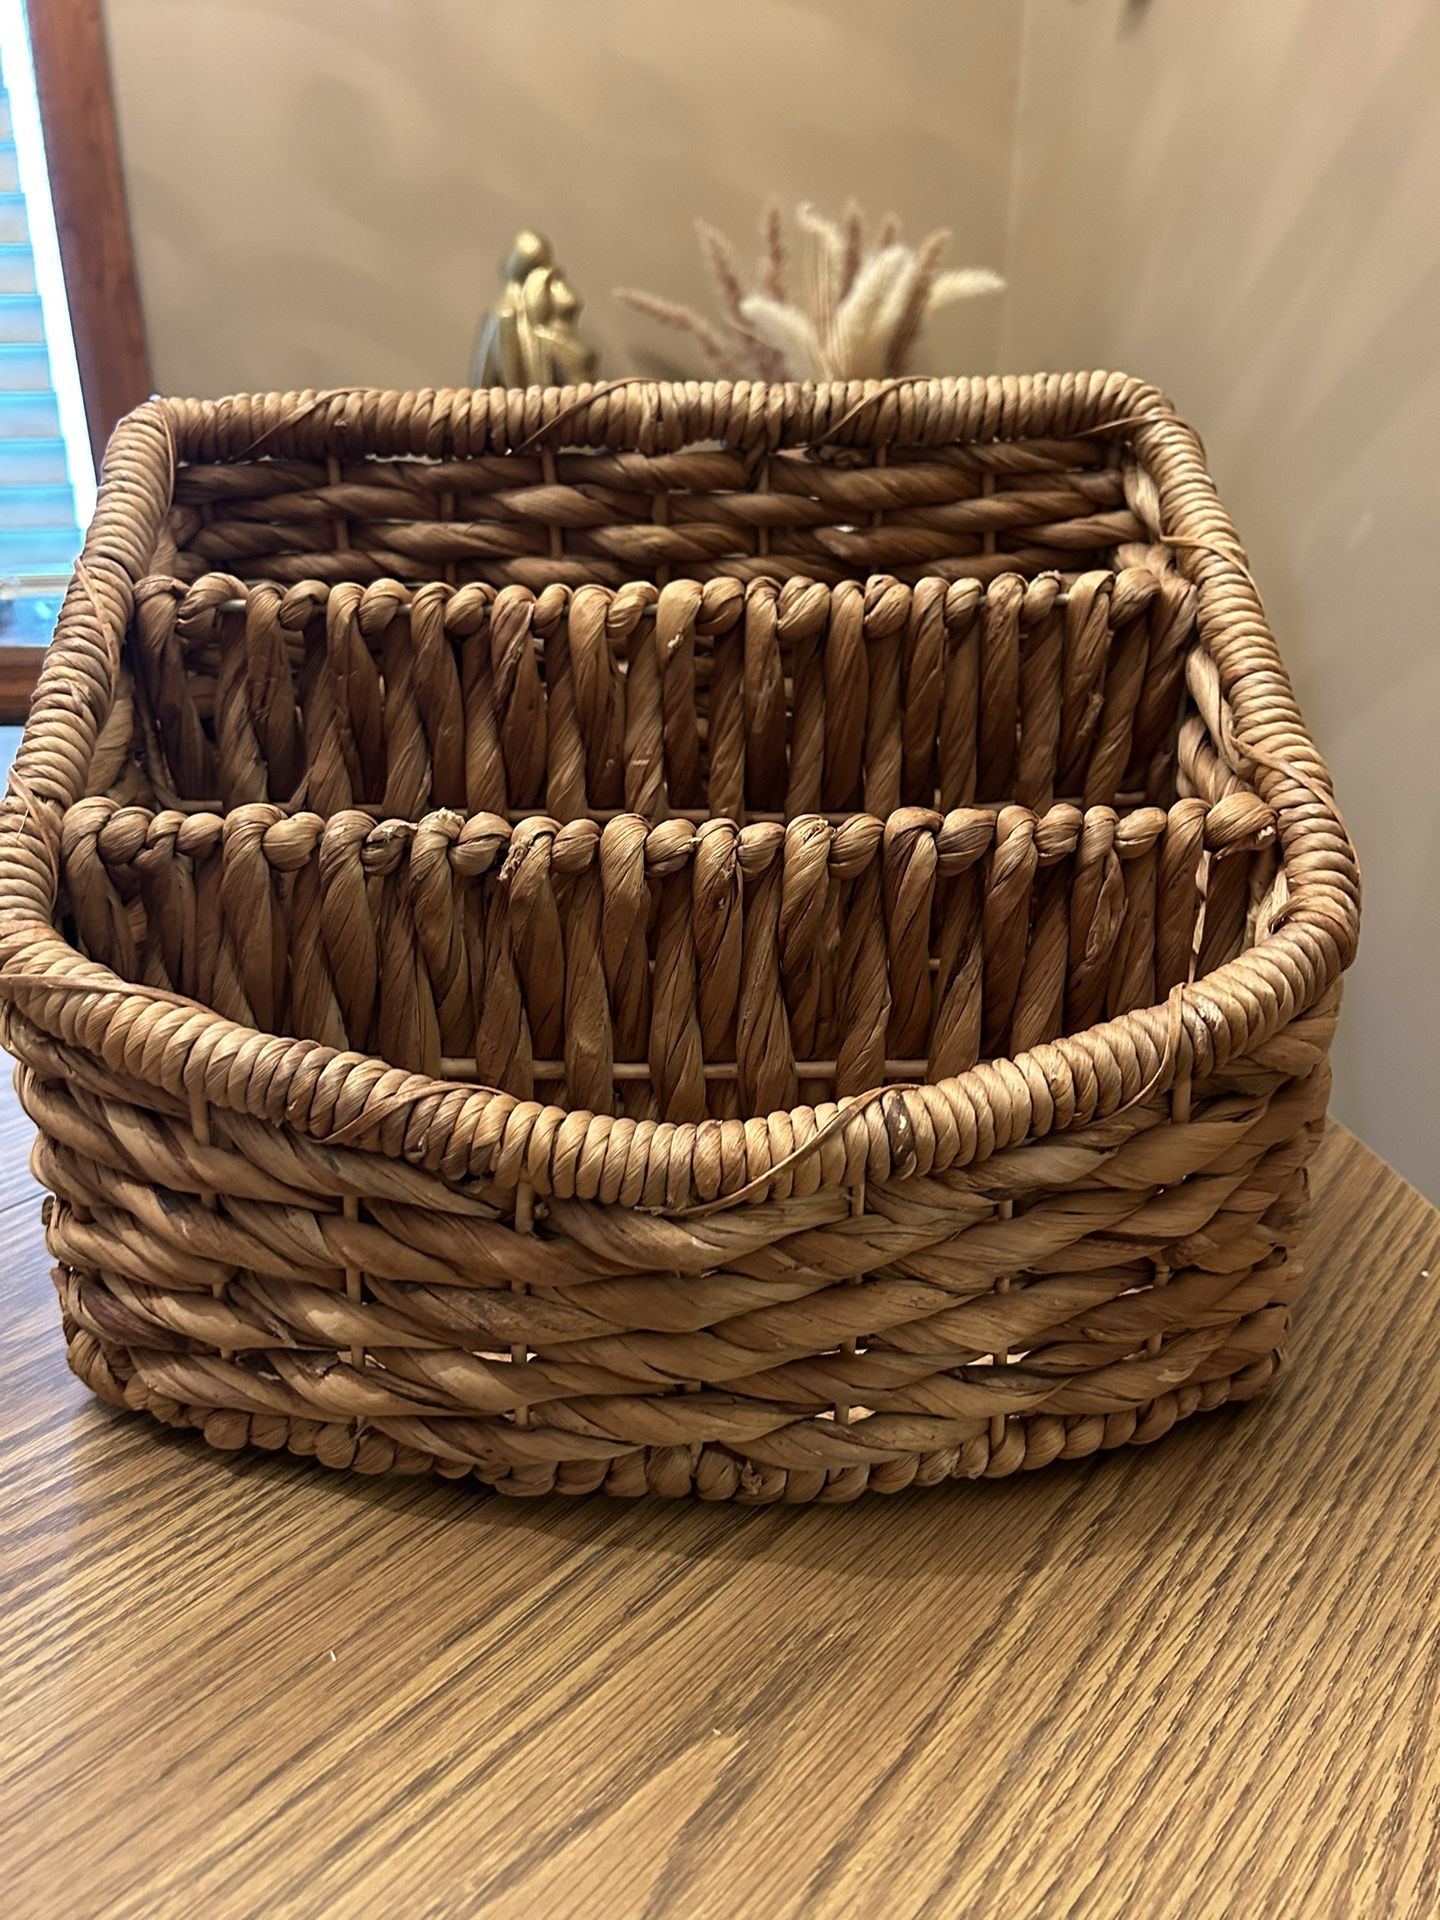 Basket - large divided wicker / seagrass - measurements in photos